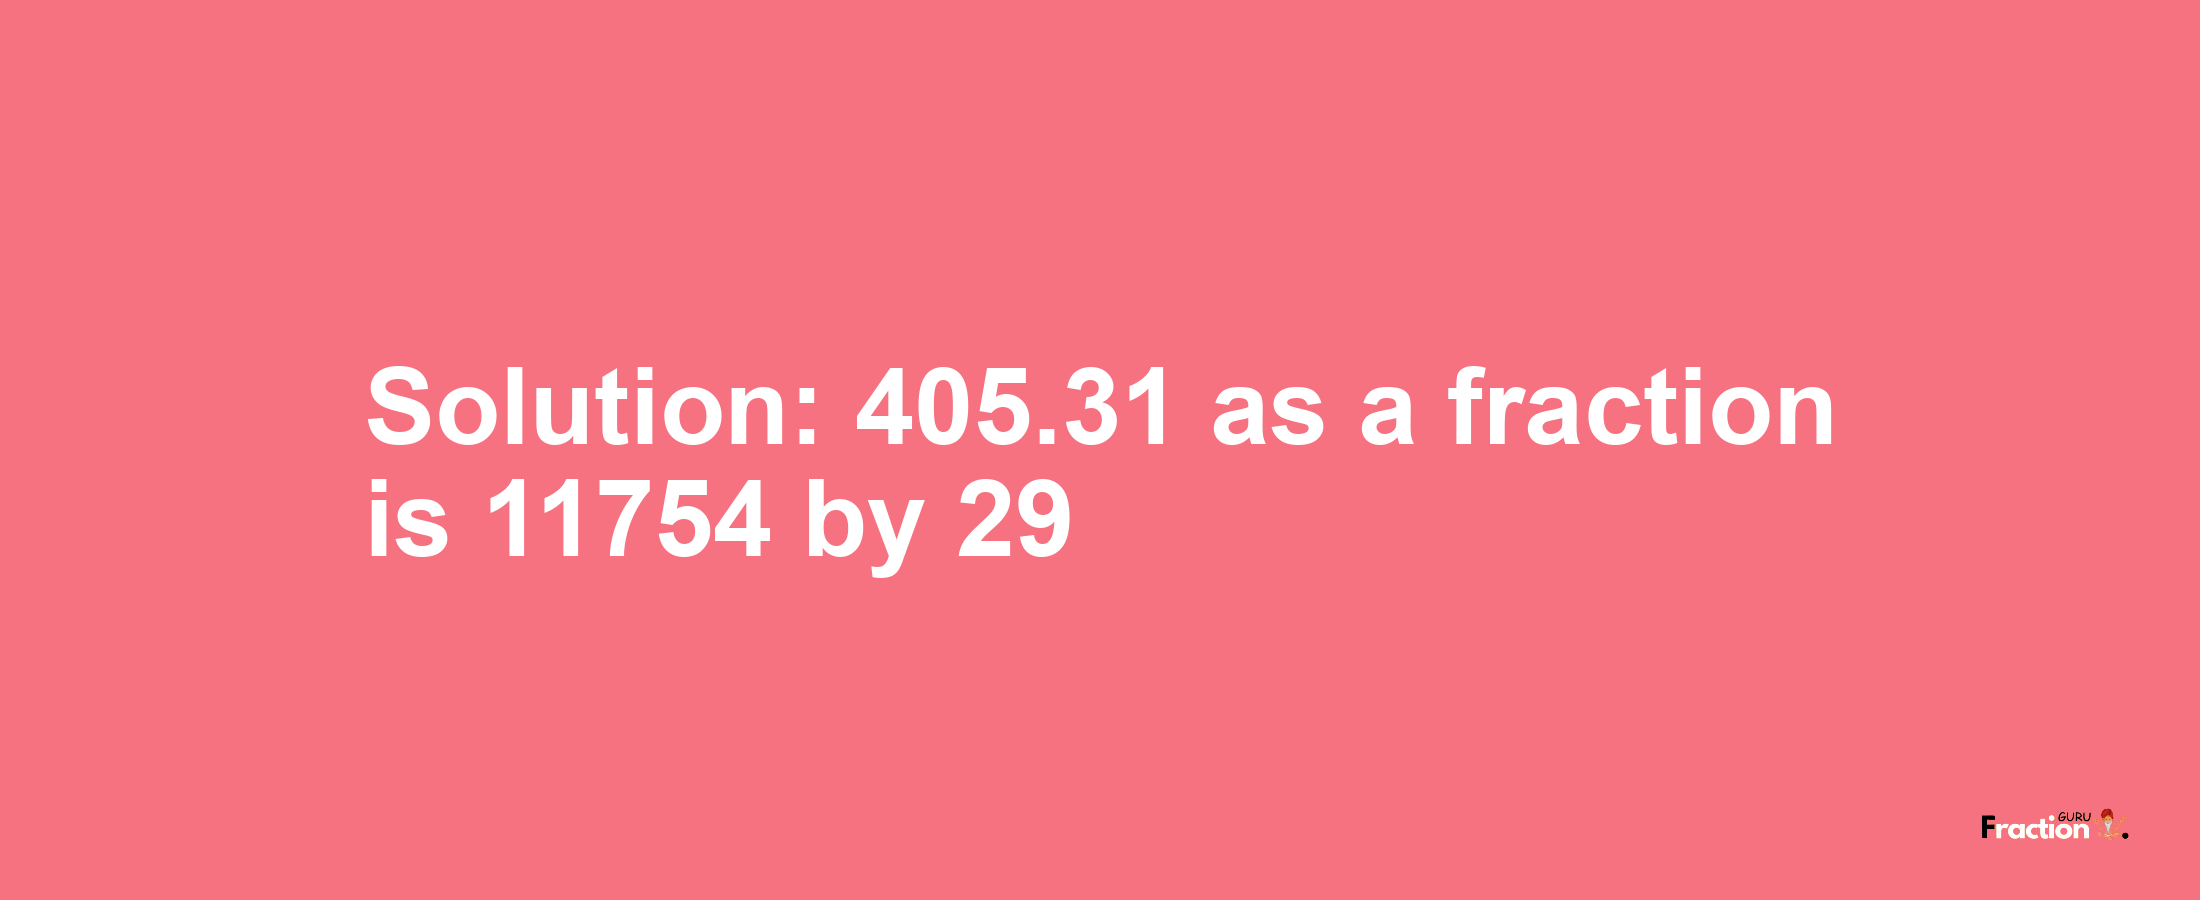 Solution:405.31 as a fraction is 11754/29